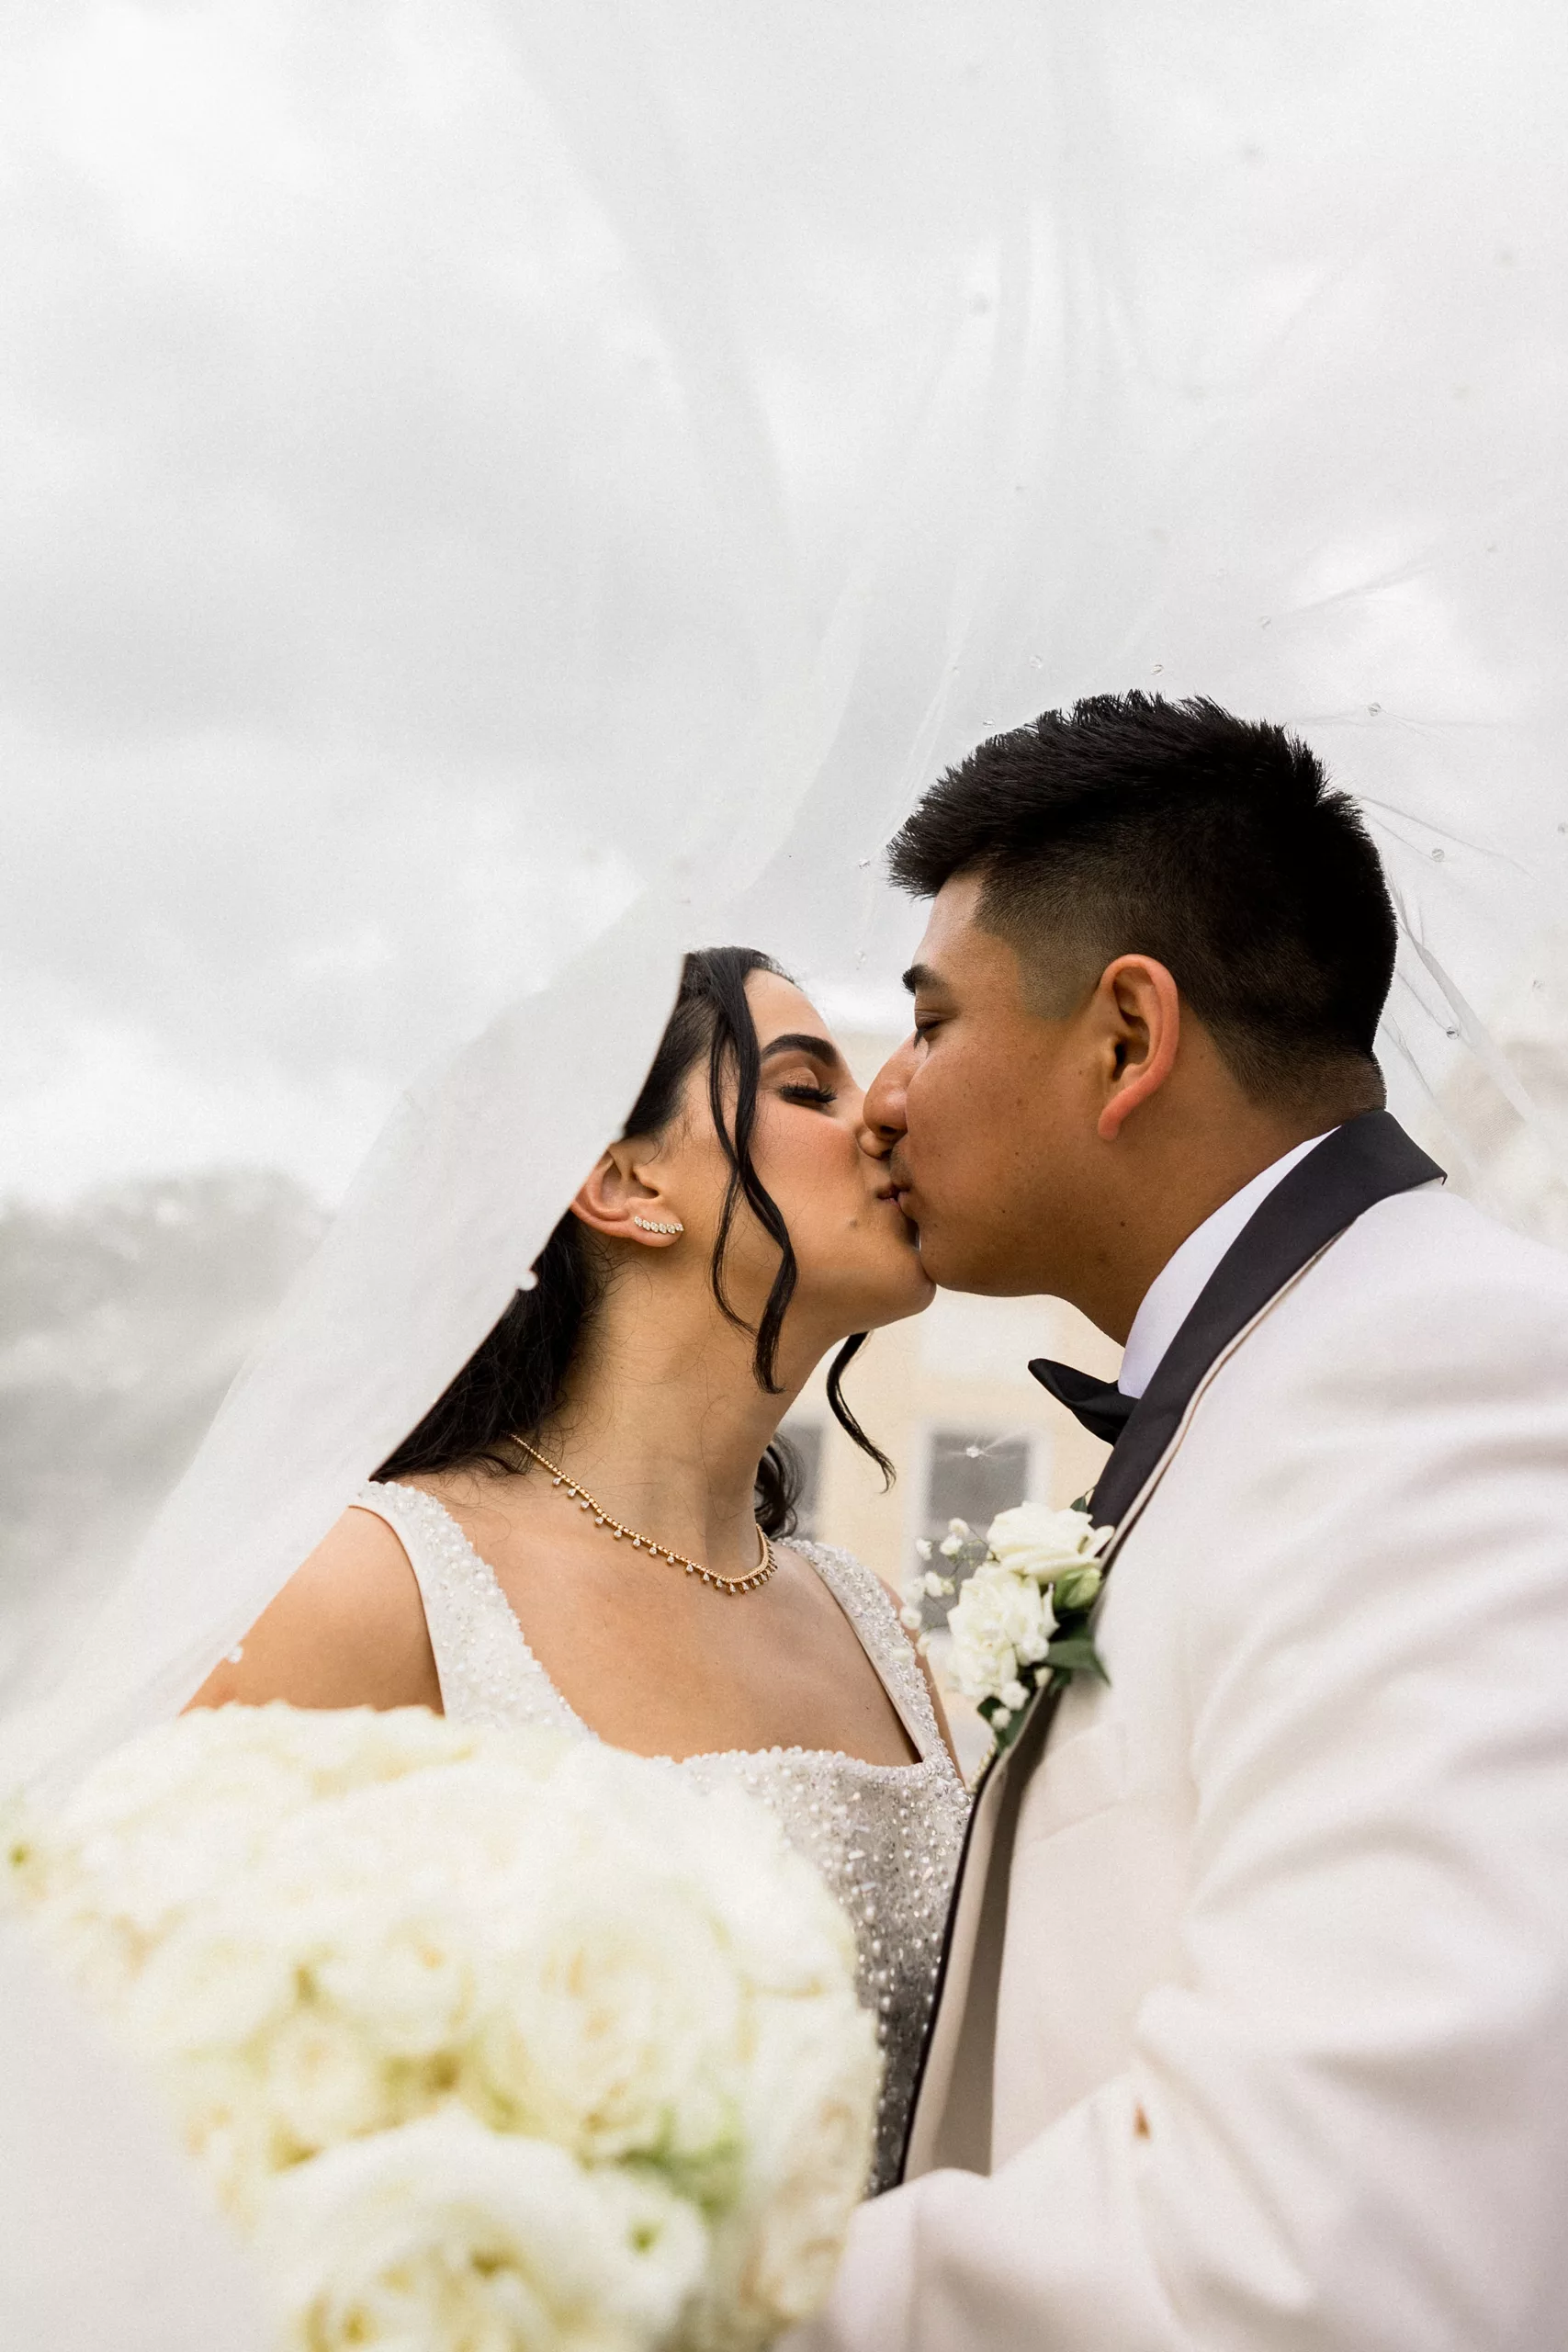 Newlyweds kiss while hiding under the long veil